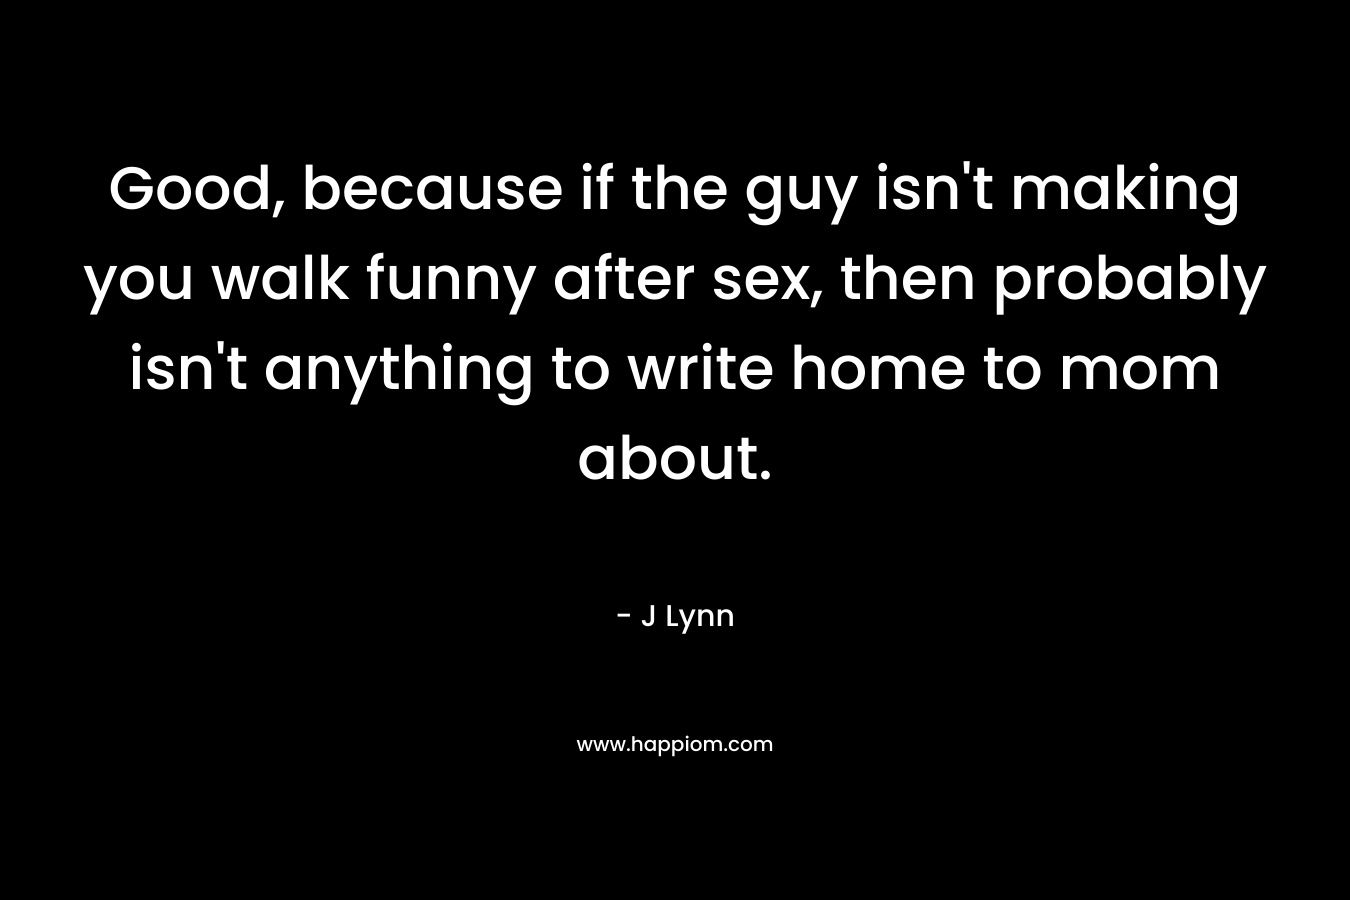 Good, because if the guy isn't making you walk funny after sex, then probably isn't anything to write home to mom about.